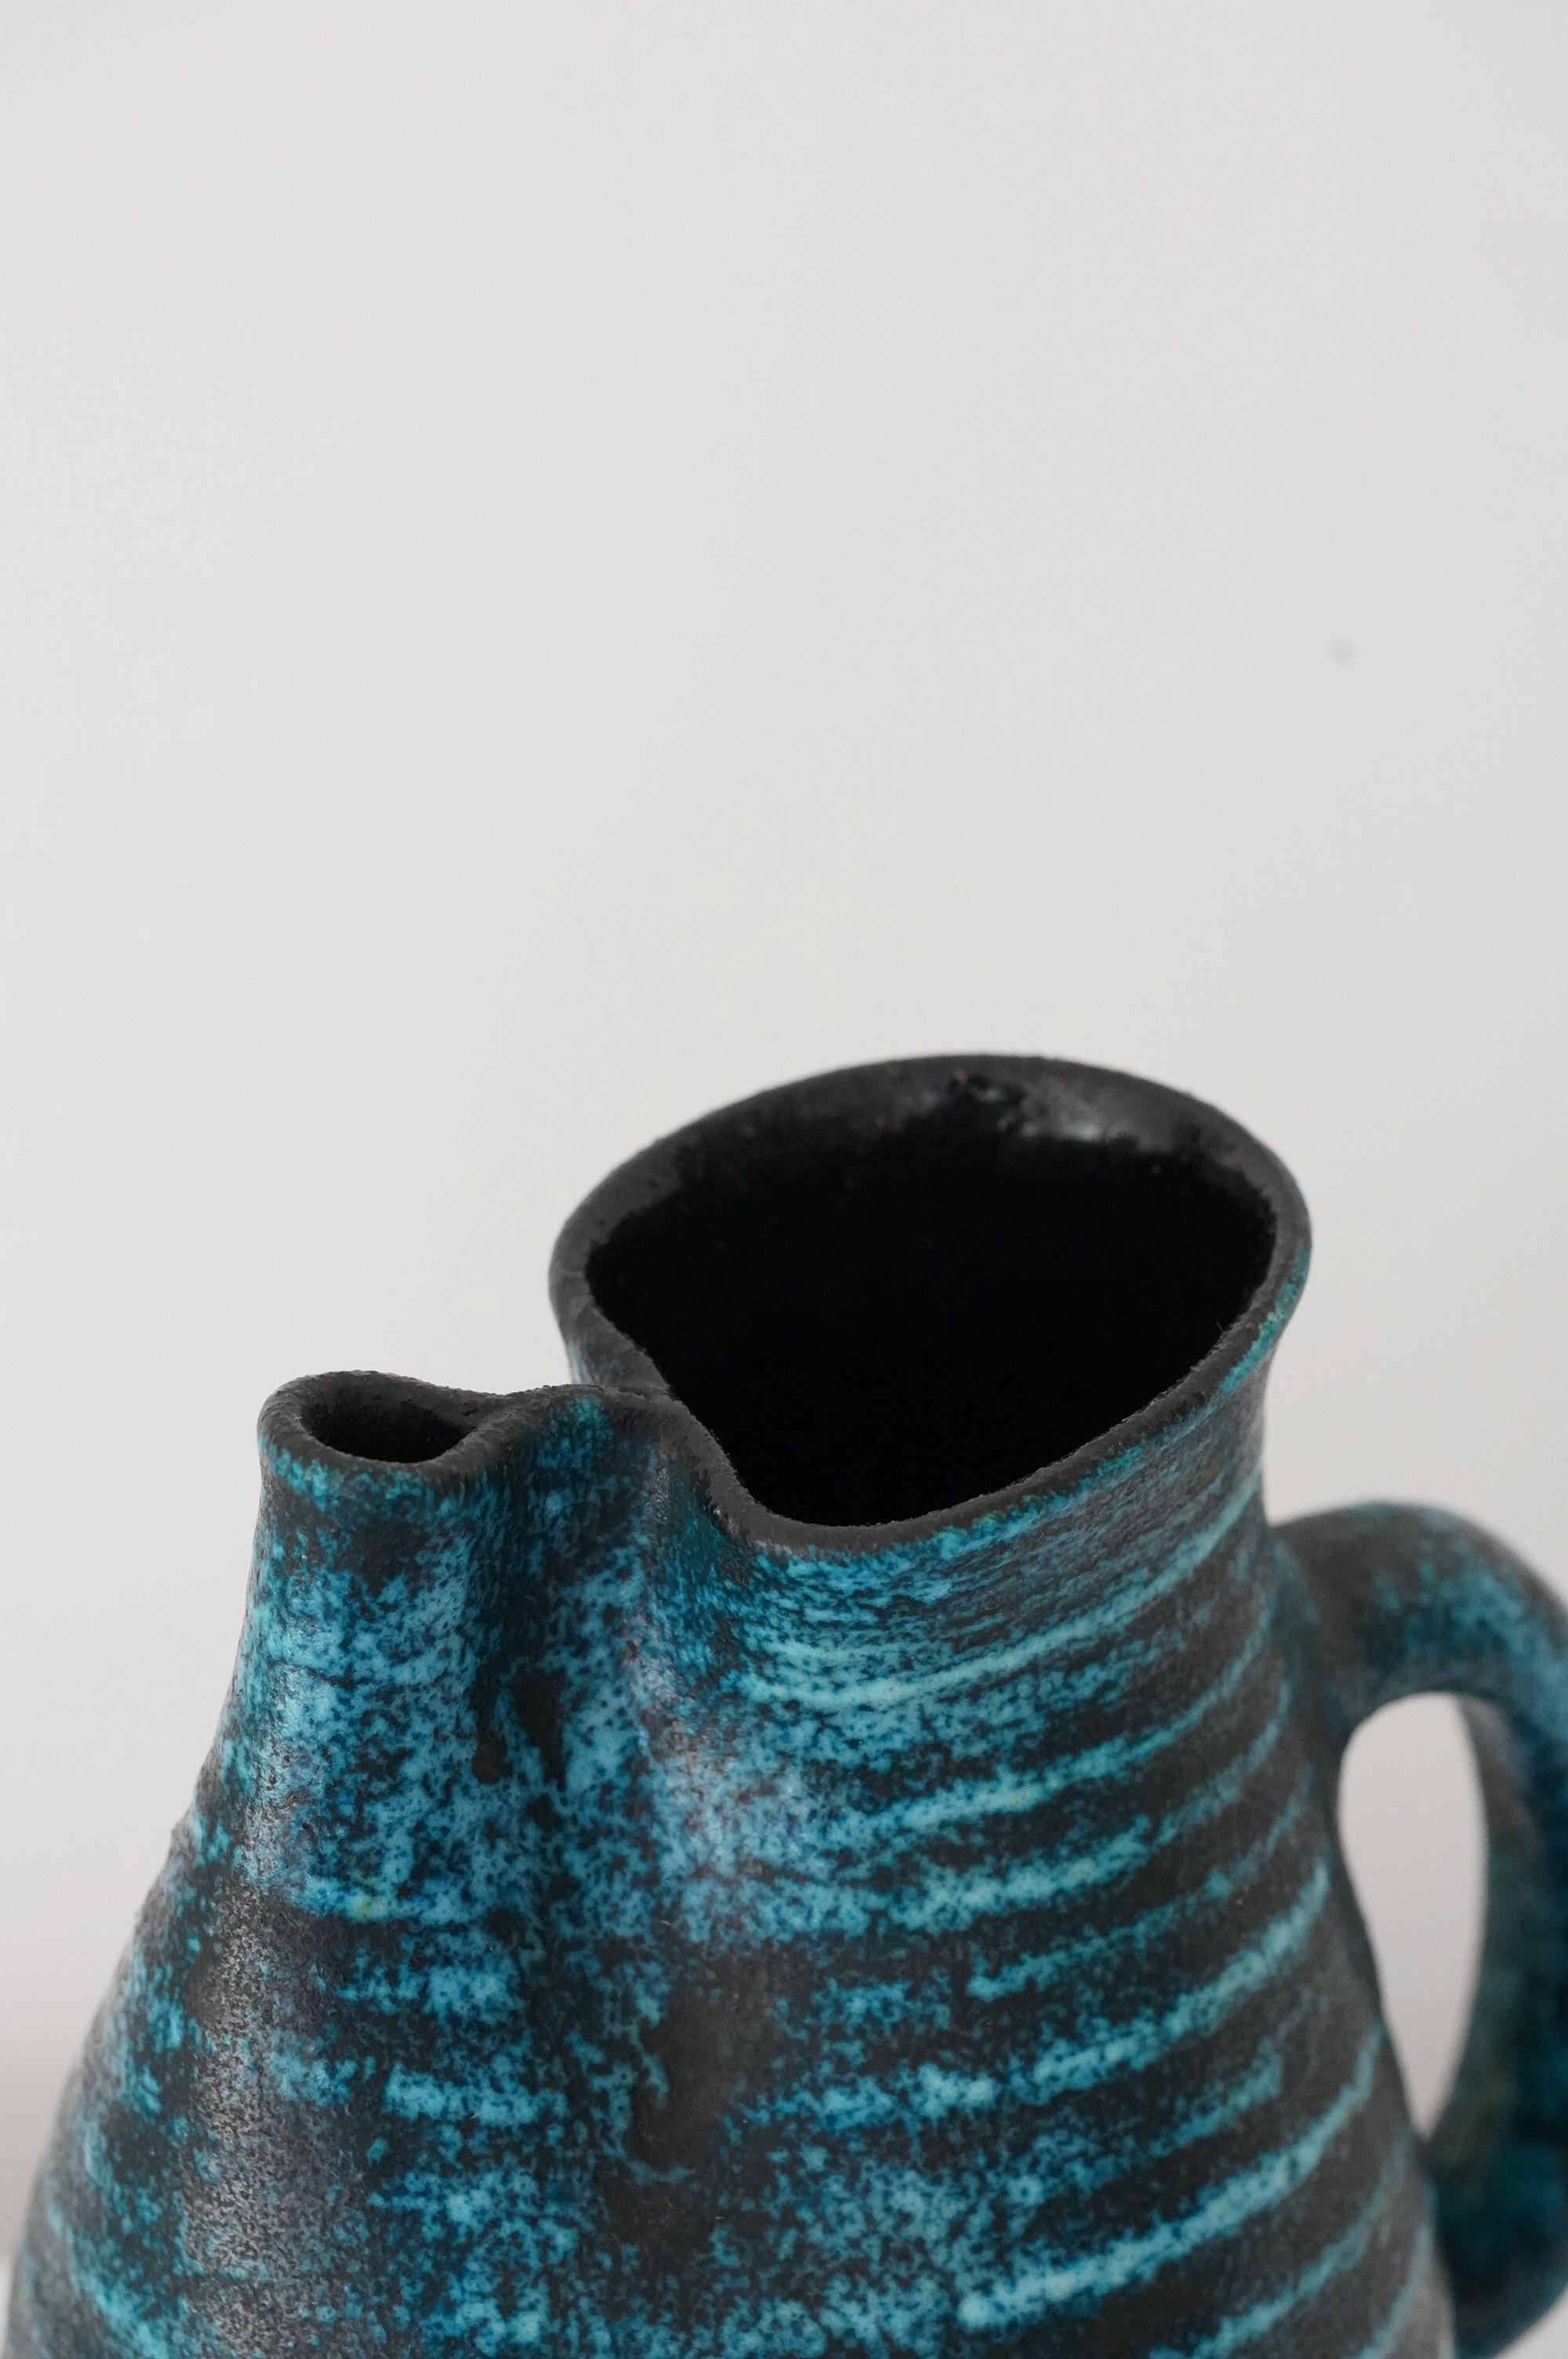 Accolay Freeform Blue Ceramic Pitcher, France 1950s For Sale 3